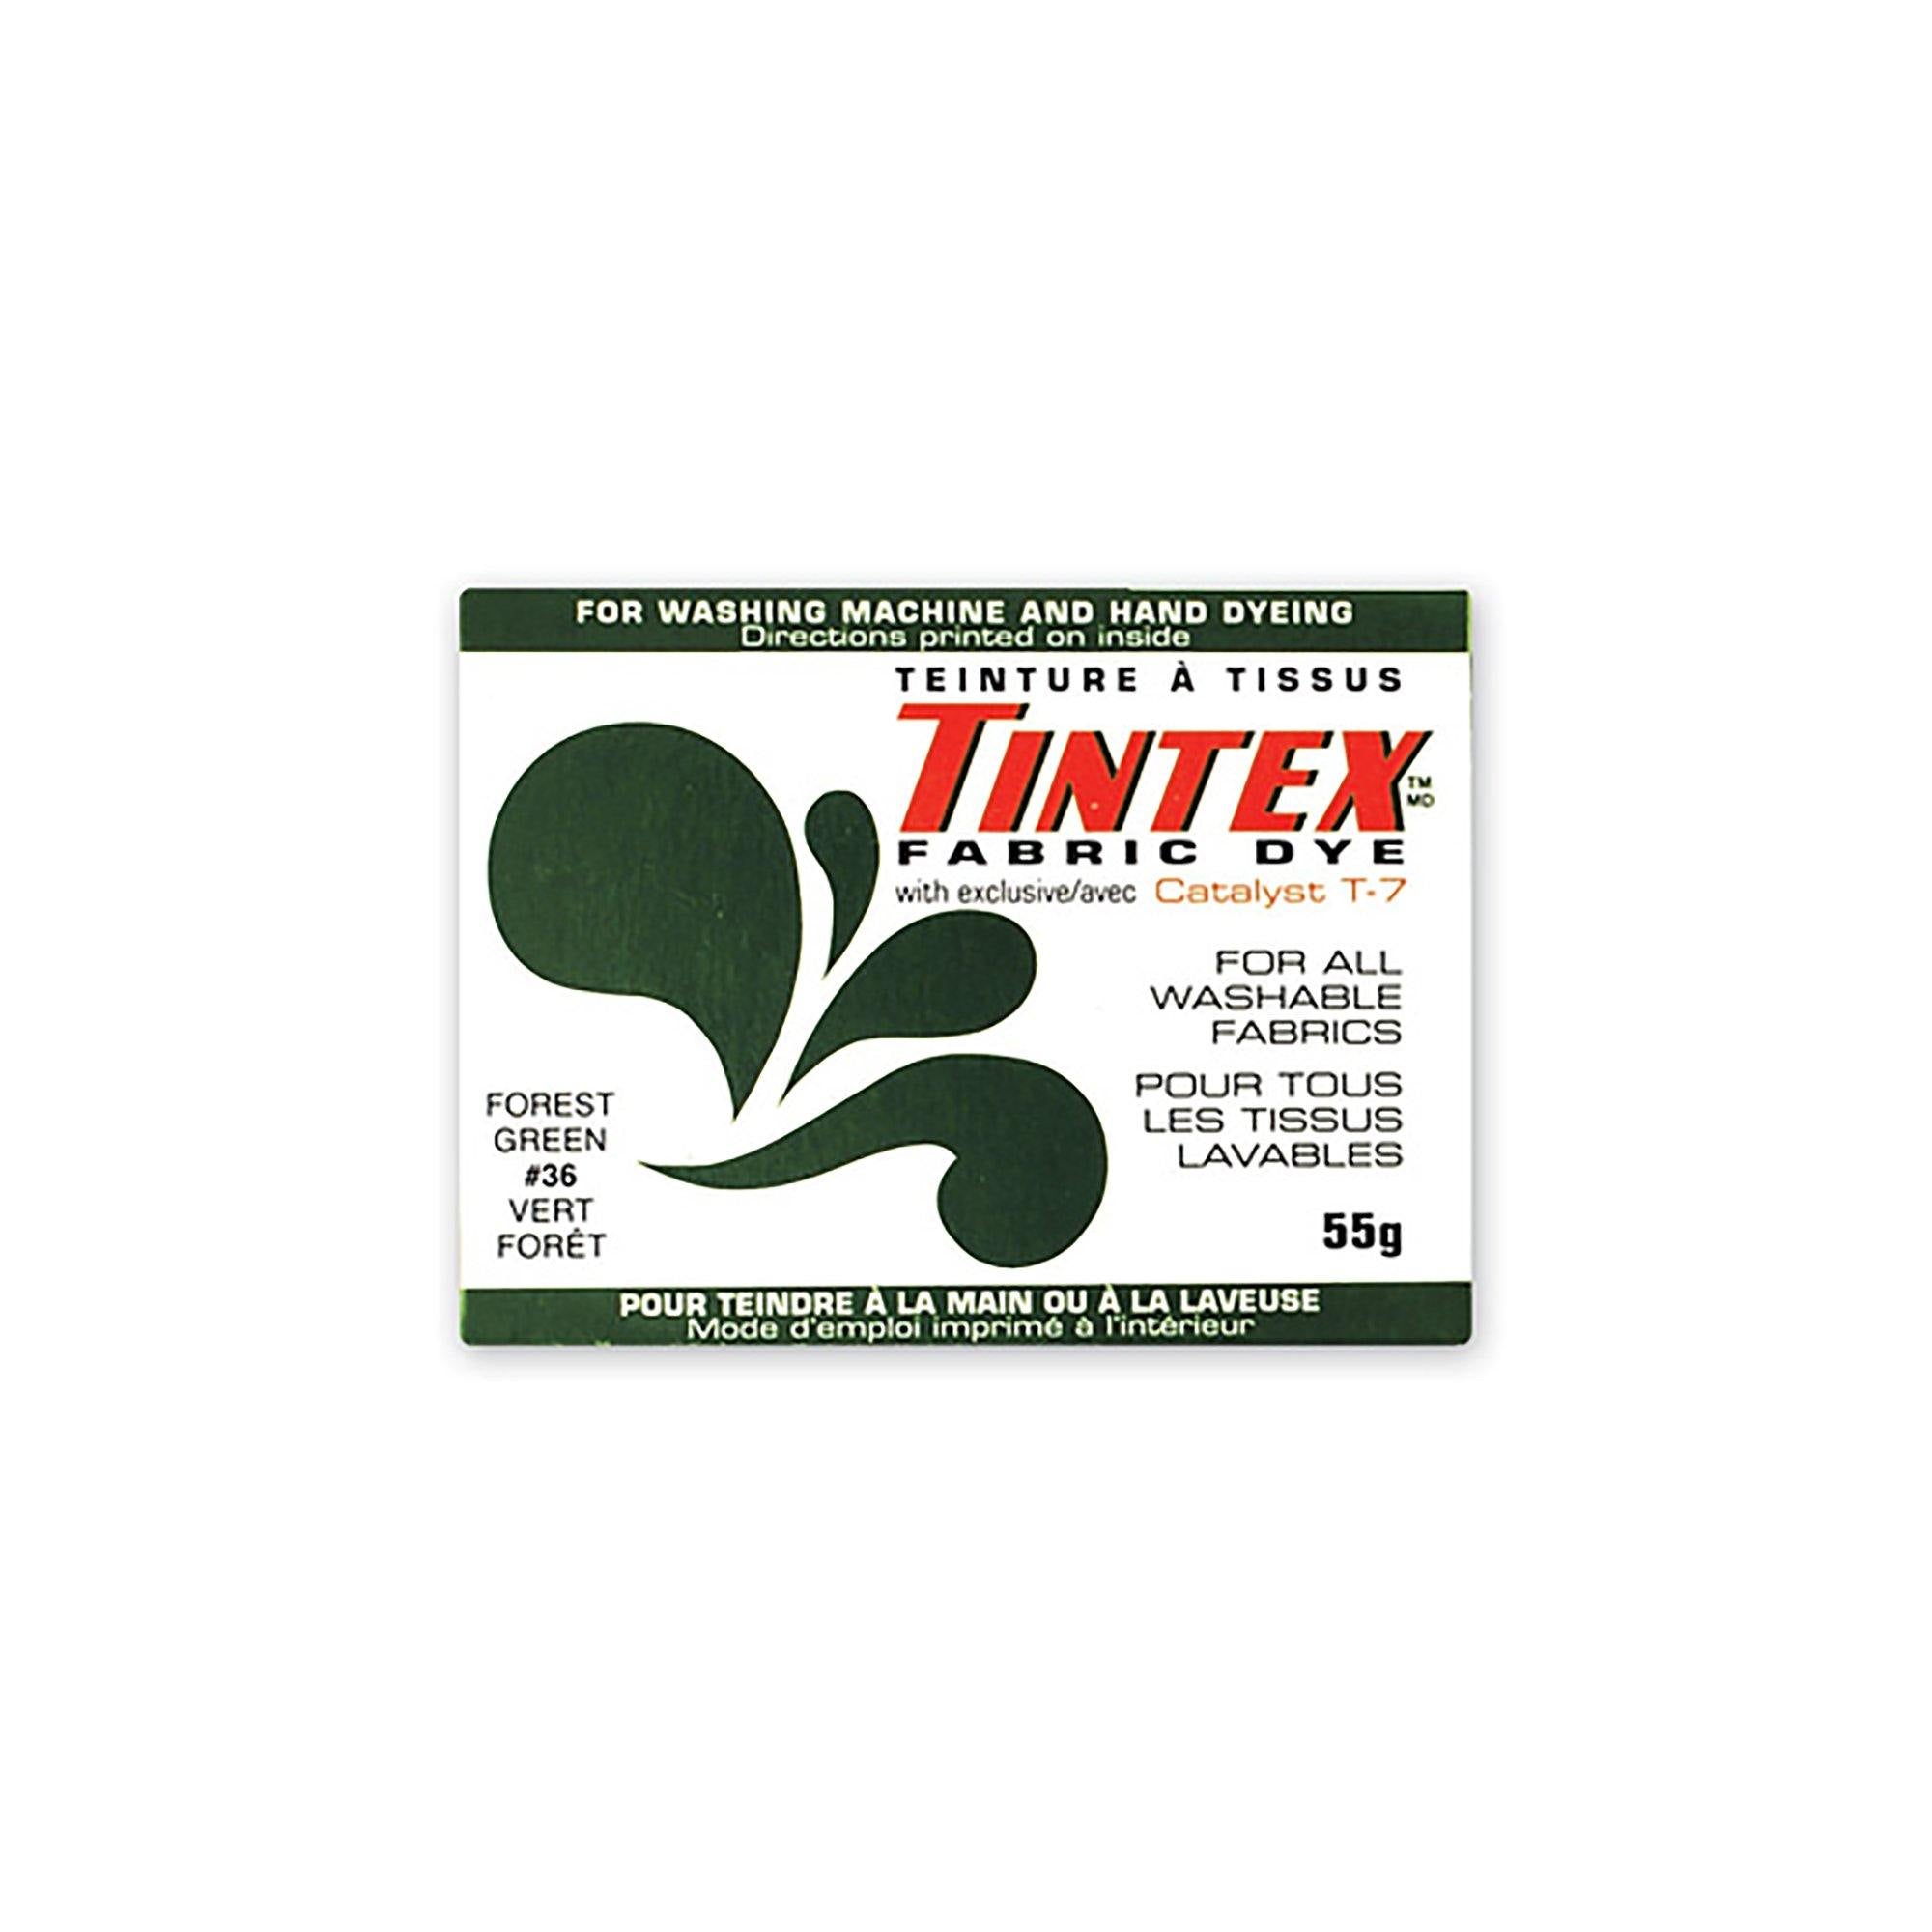 36 Forest Green Tintex: 55G Fabric Dye For All Washable Fabrics - Dollar Max Dépôt